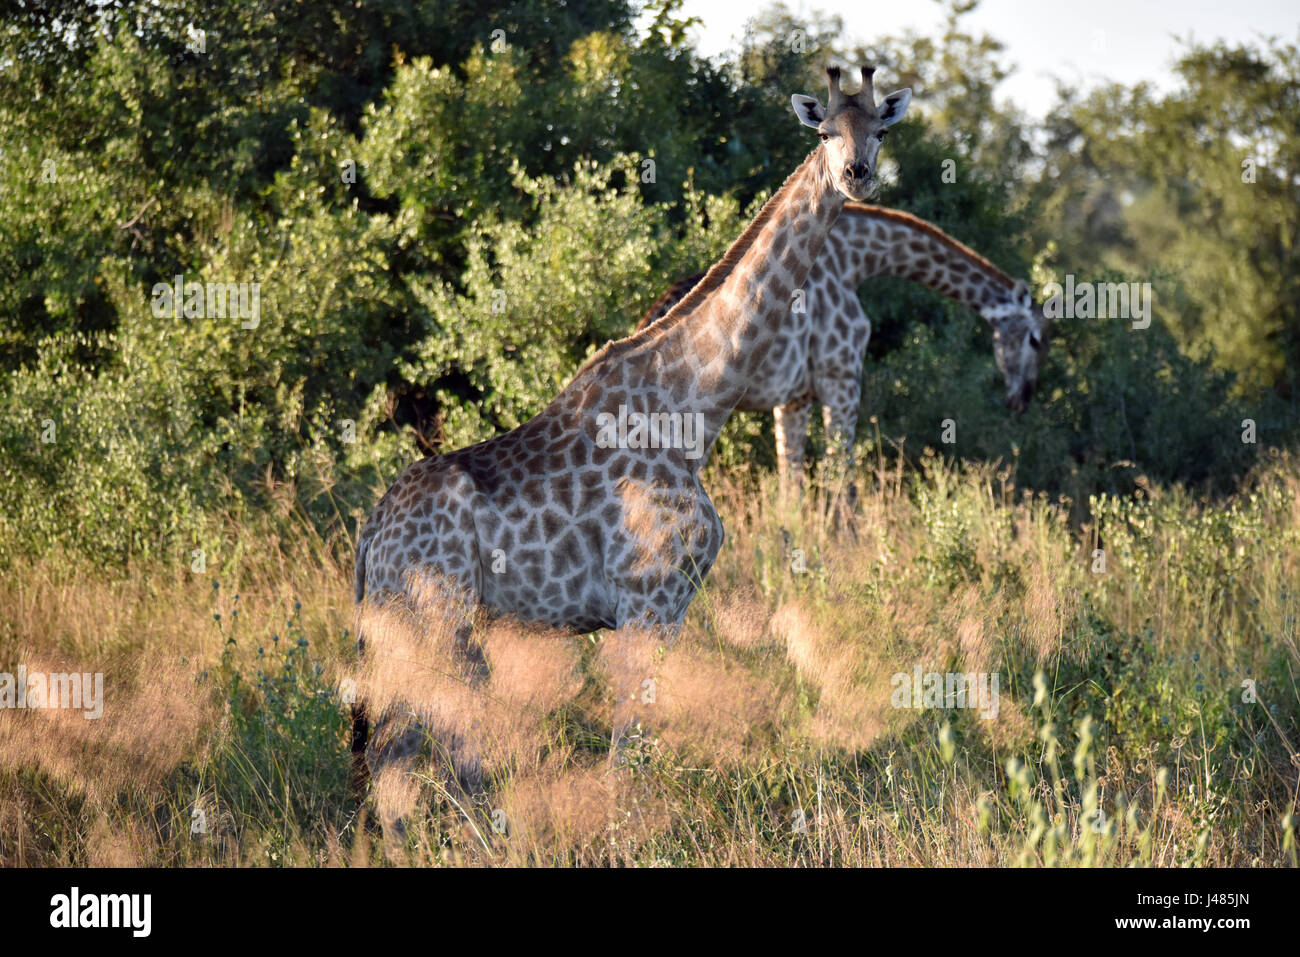 Giraffes grazing in Savannah vegetation. Taken on 04.04.2017. The giraffe (Giraffa camelopardalis) is the tallest land-dwelling animal on earth. Bulls can reach up to 6 metres in height, cows up to 4.5. Their most striking feature is their disproportionately long neck, which is made up of just 7 extremely elongated neck vertebras. Today, giraffes only live in the Savannahs south of the Sahara. Until as late as the 7th century, giraffes could also be found in North Africa. The cloven hoofed animals graze primarily on acacia trees. Their 50cm tongue helps them to get the very last leaves off the Stock Photo